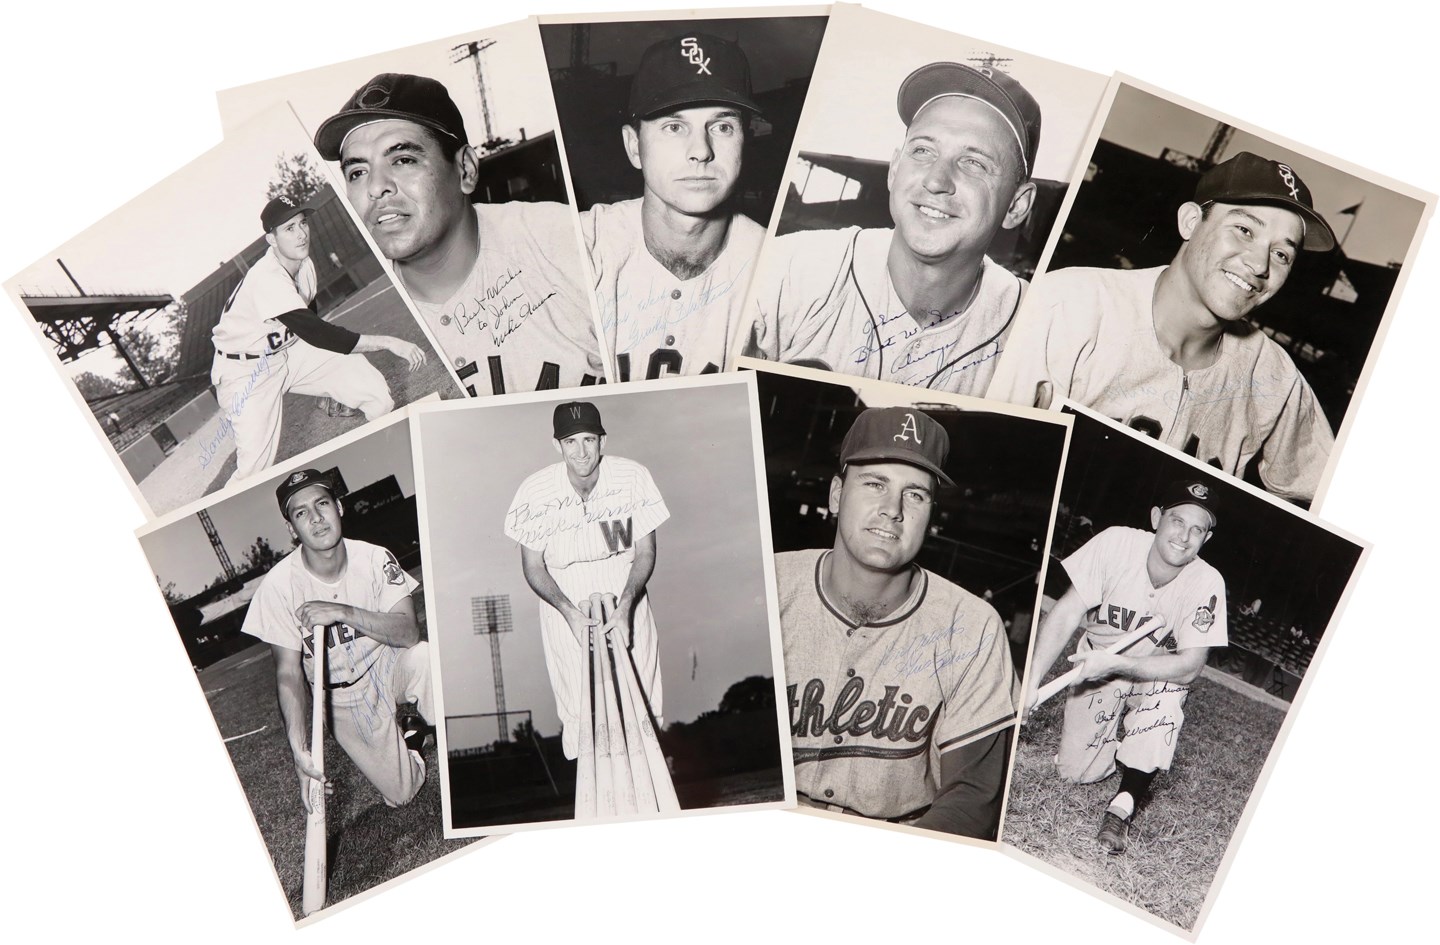 Vintage Sports Photographs - Signed 1950s Don Wingfield Photo Collection (9) (PSA Type I)